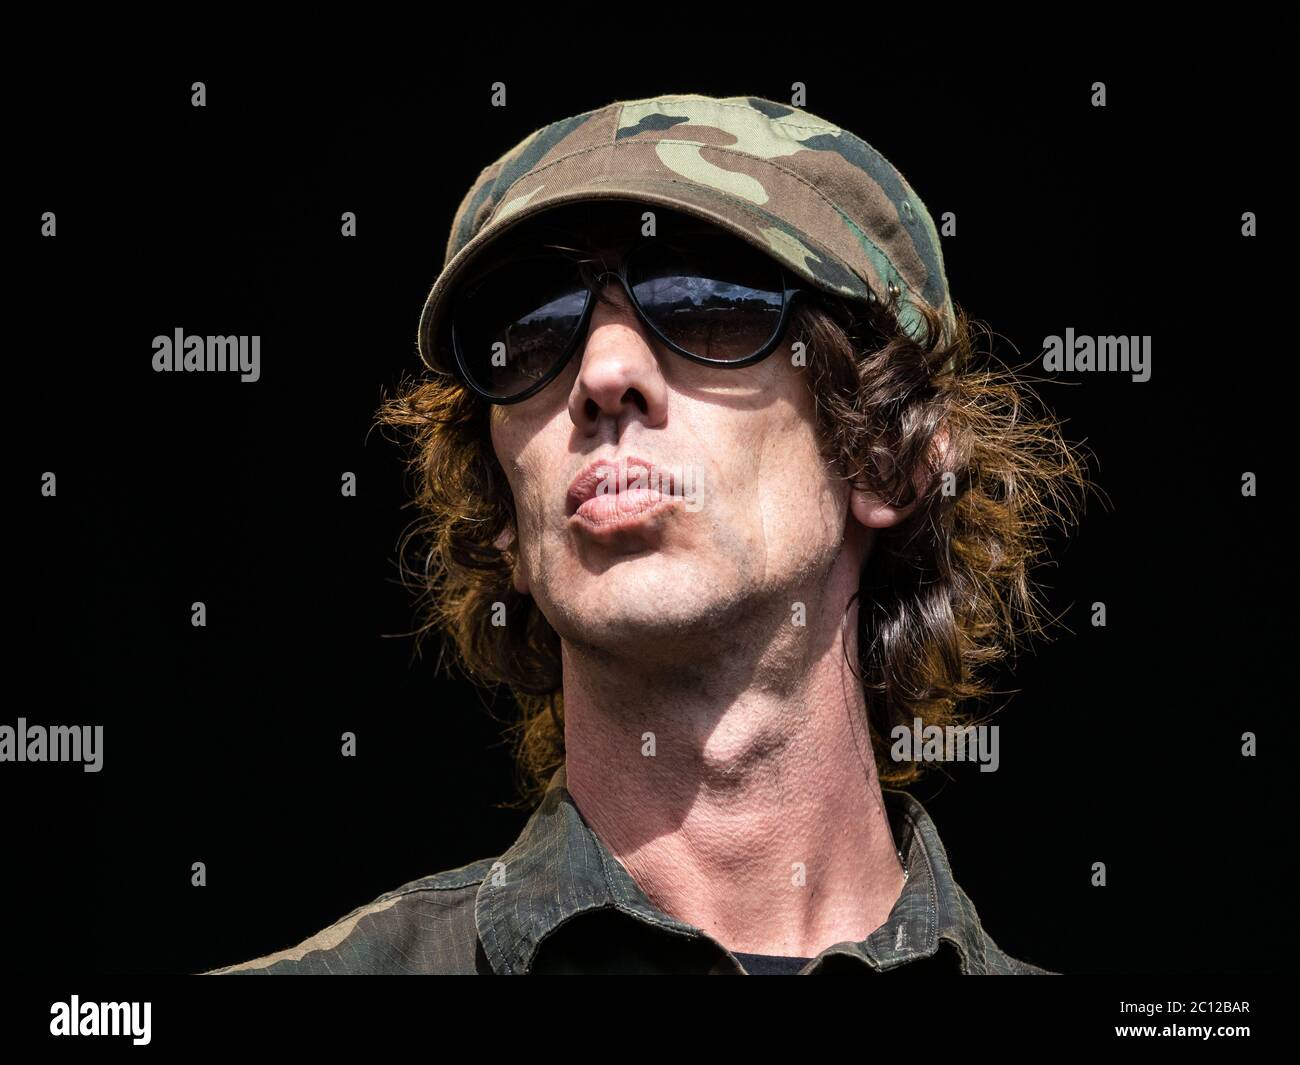 Kvaerndrup, Denmark. 01st, June 2019. The English singer, songwriter and musician Richard Ashcroft performs a live concert during the Danish music festival Heartland Festival 2019. (Photo credit: Gonzales Photo - Kent Rasmussen). Stock Photo